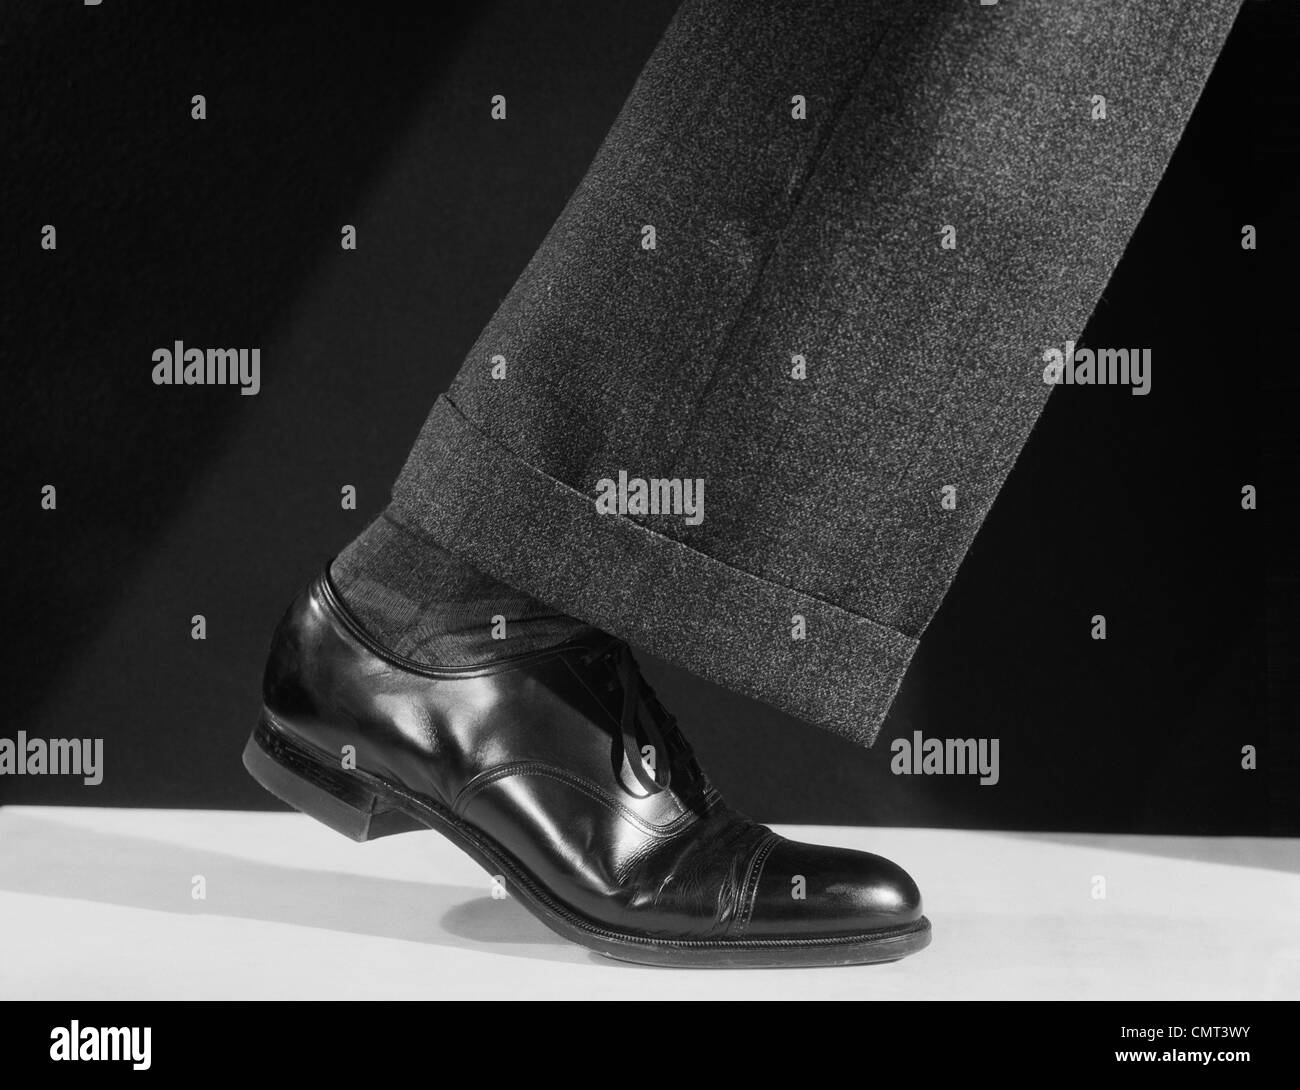 1930s 1940s 1950s WALKING MAN’S SINGLE LEG LEATHER SHOE AND PANT CUFF Stock Photo